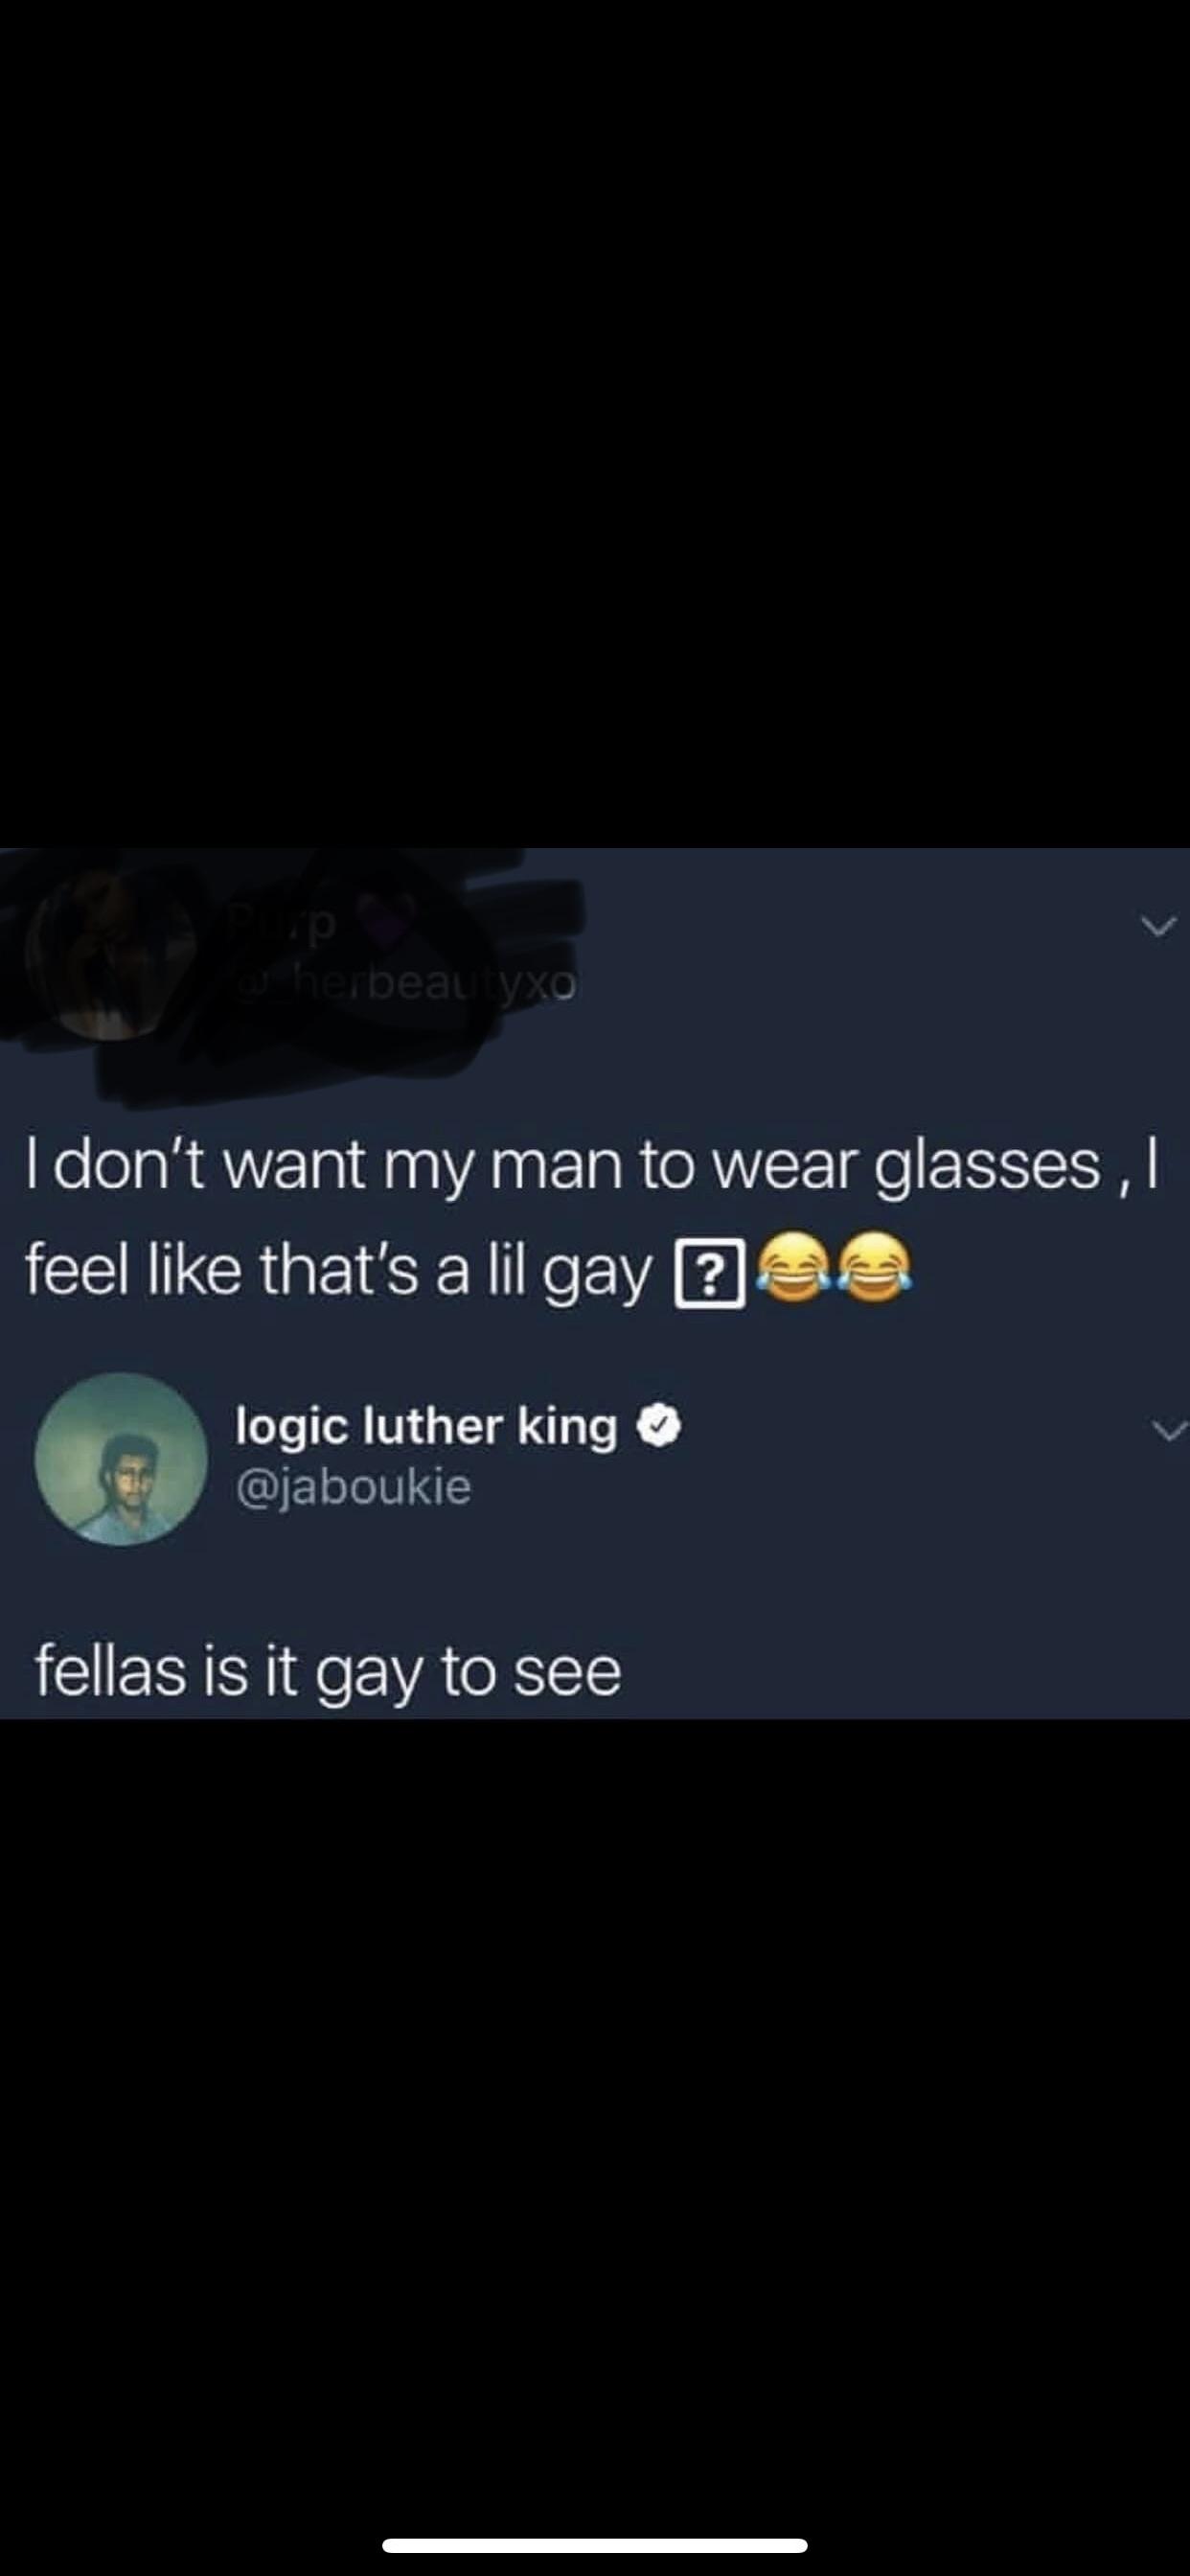 screenshot - herbeau yxo Tdon't want my man to wear glasses, feel that's a lil gay bea logic luther king fellas is it gay to see